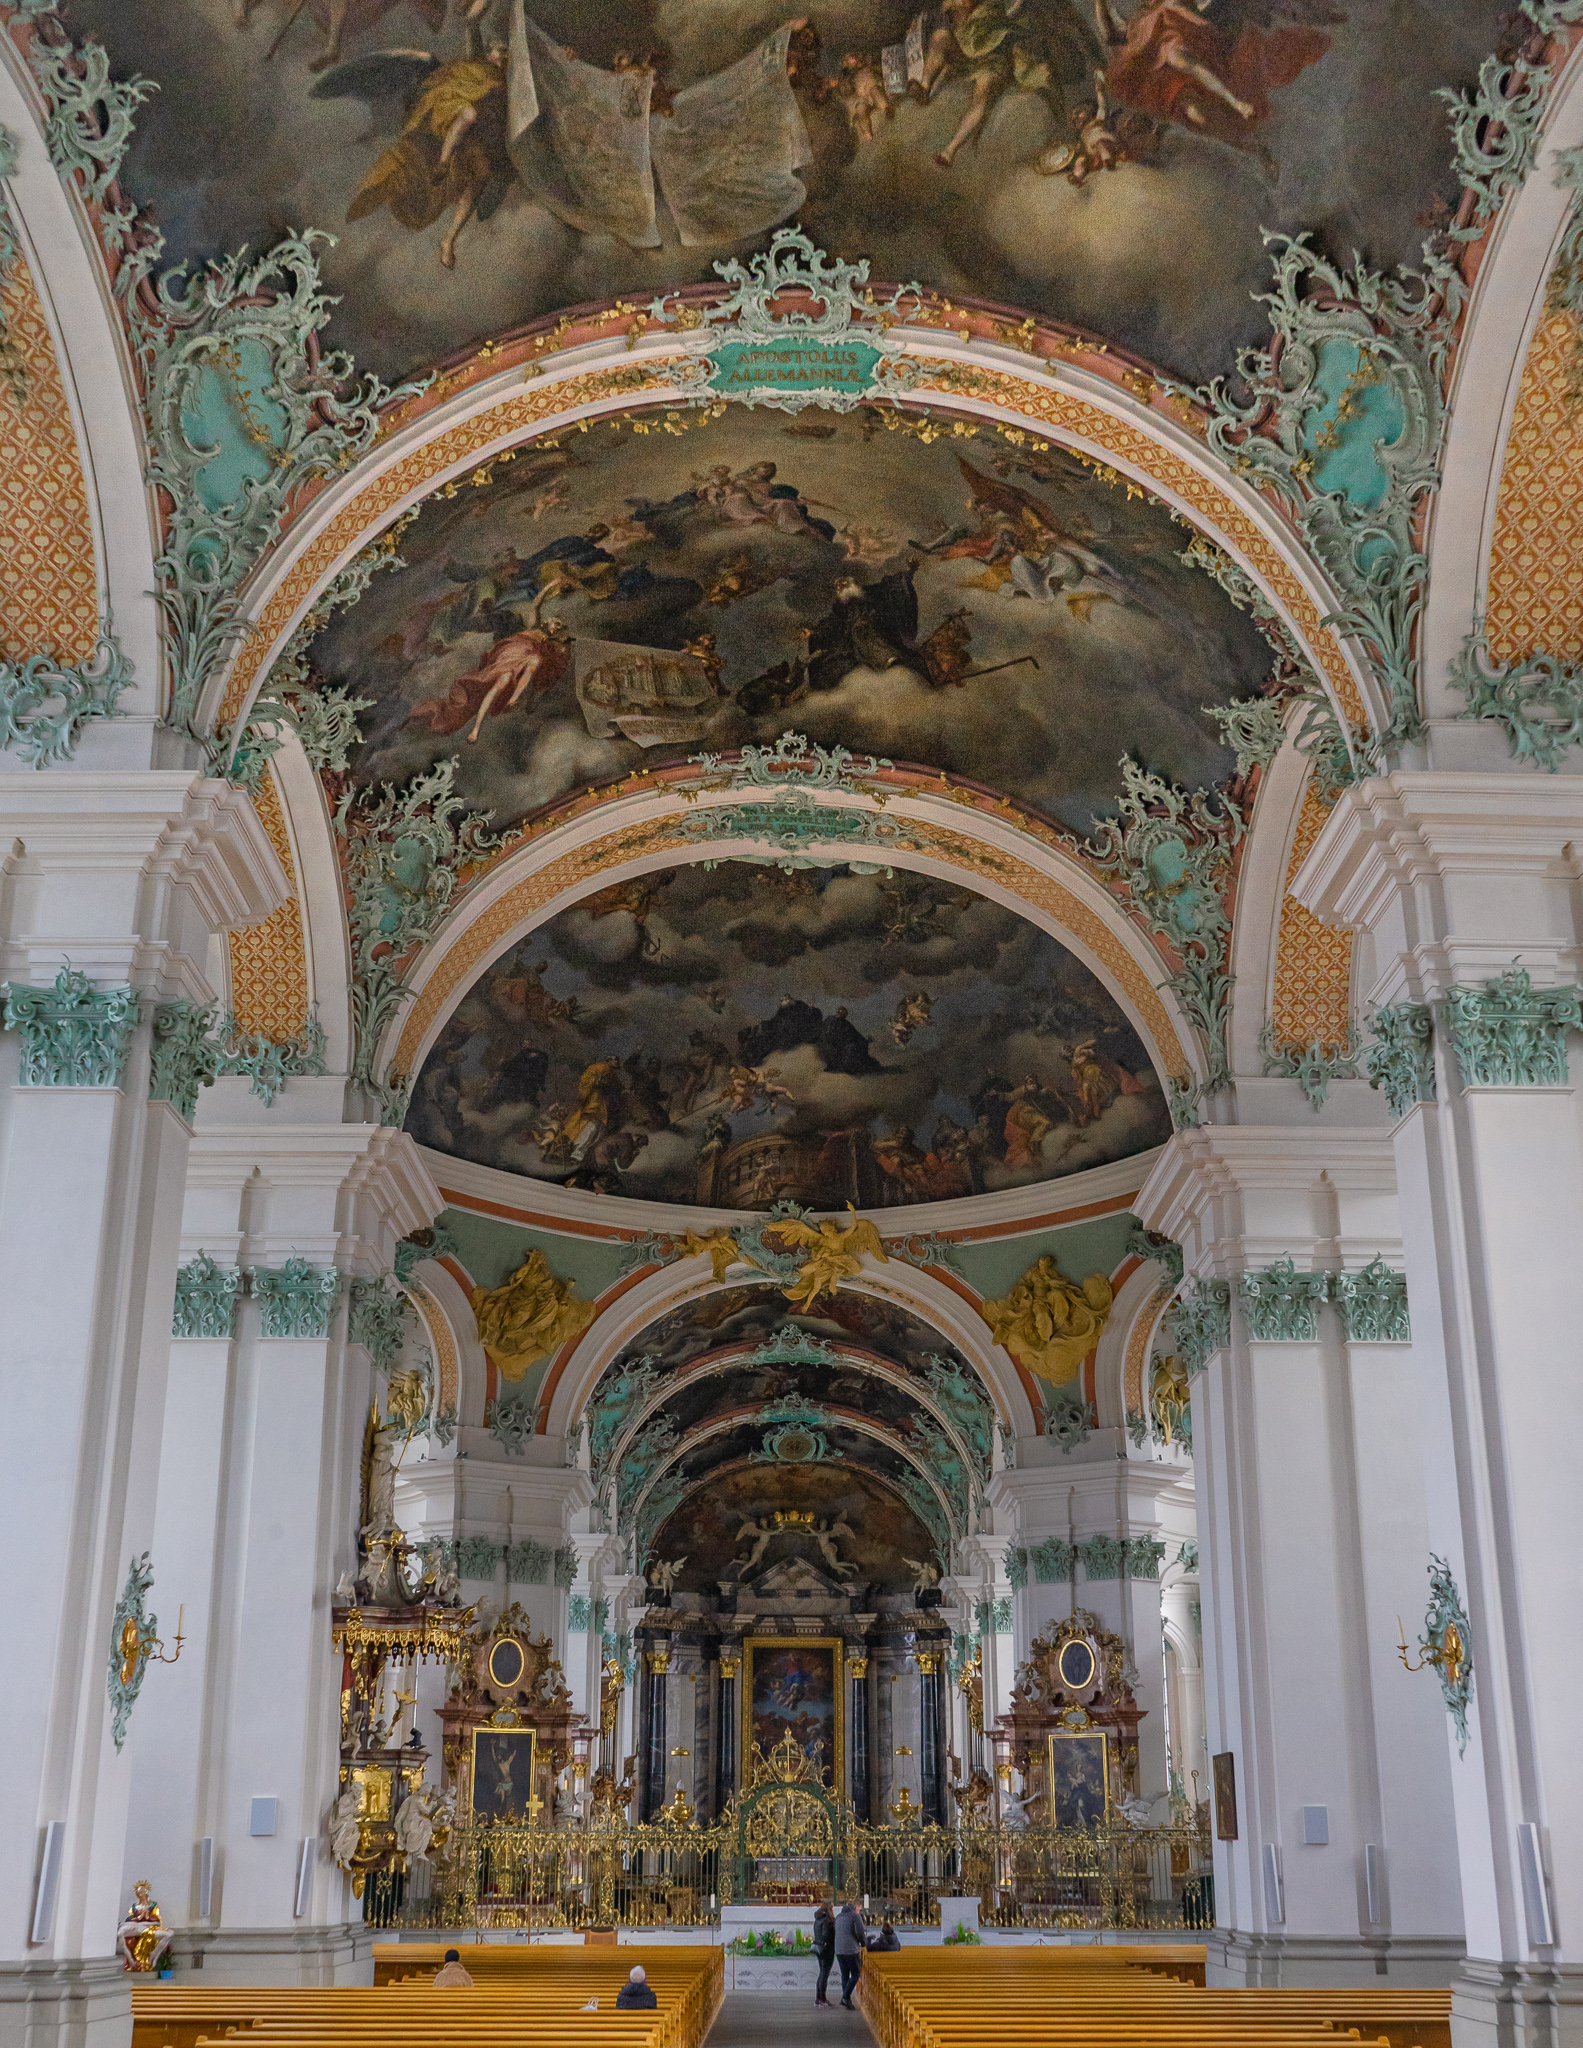 inside St. Gallen cathedral, featuring colorful frescos and carvings